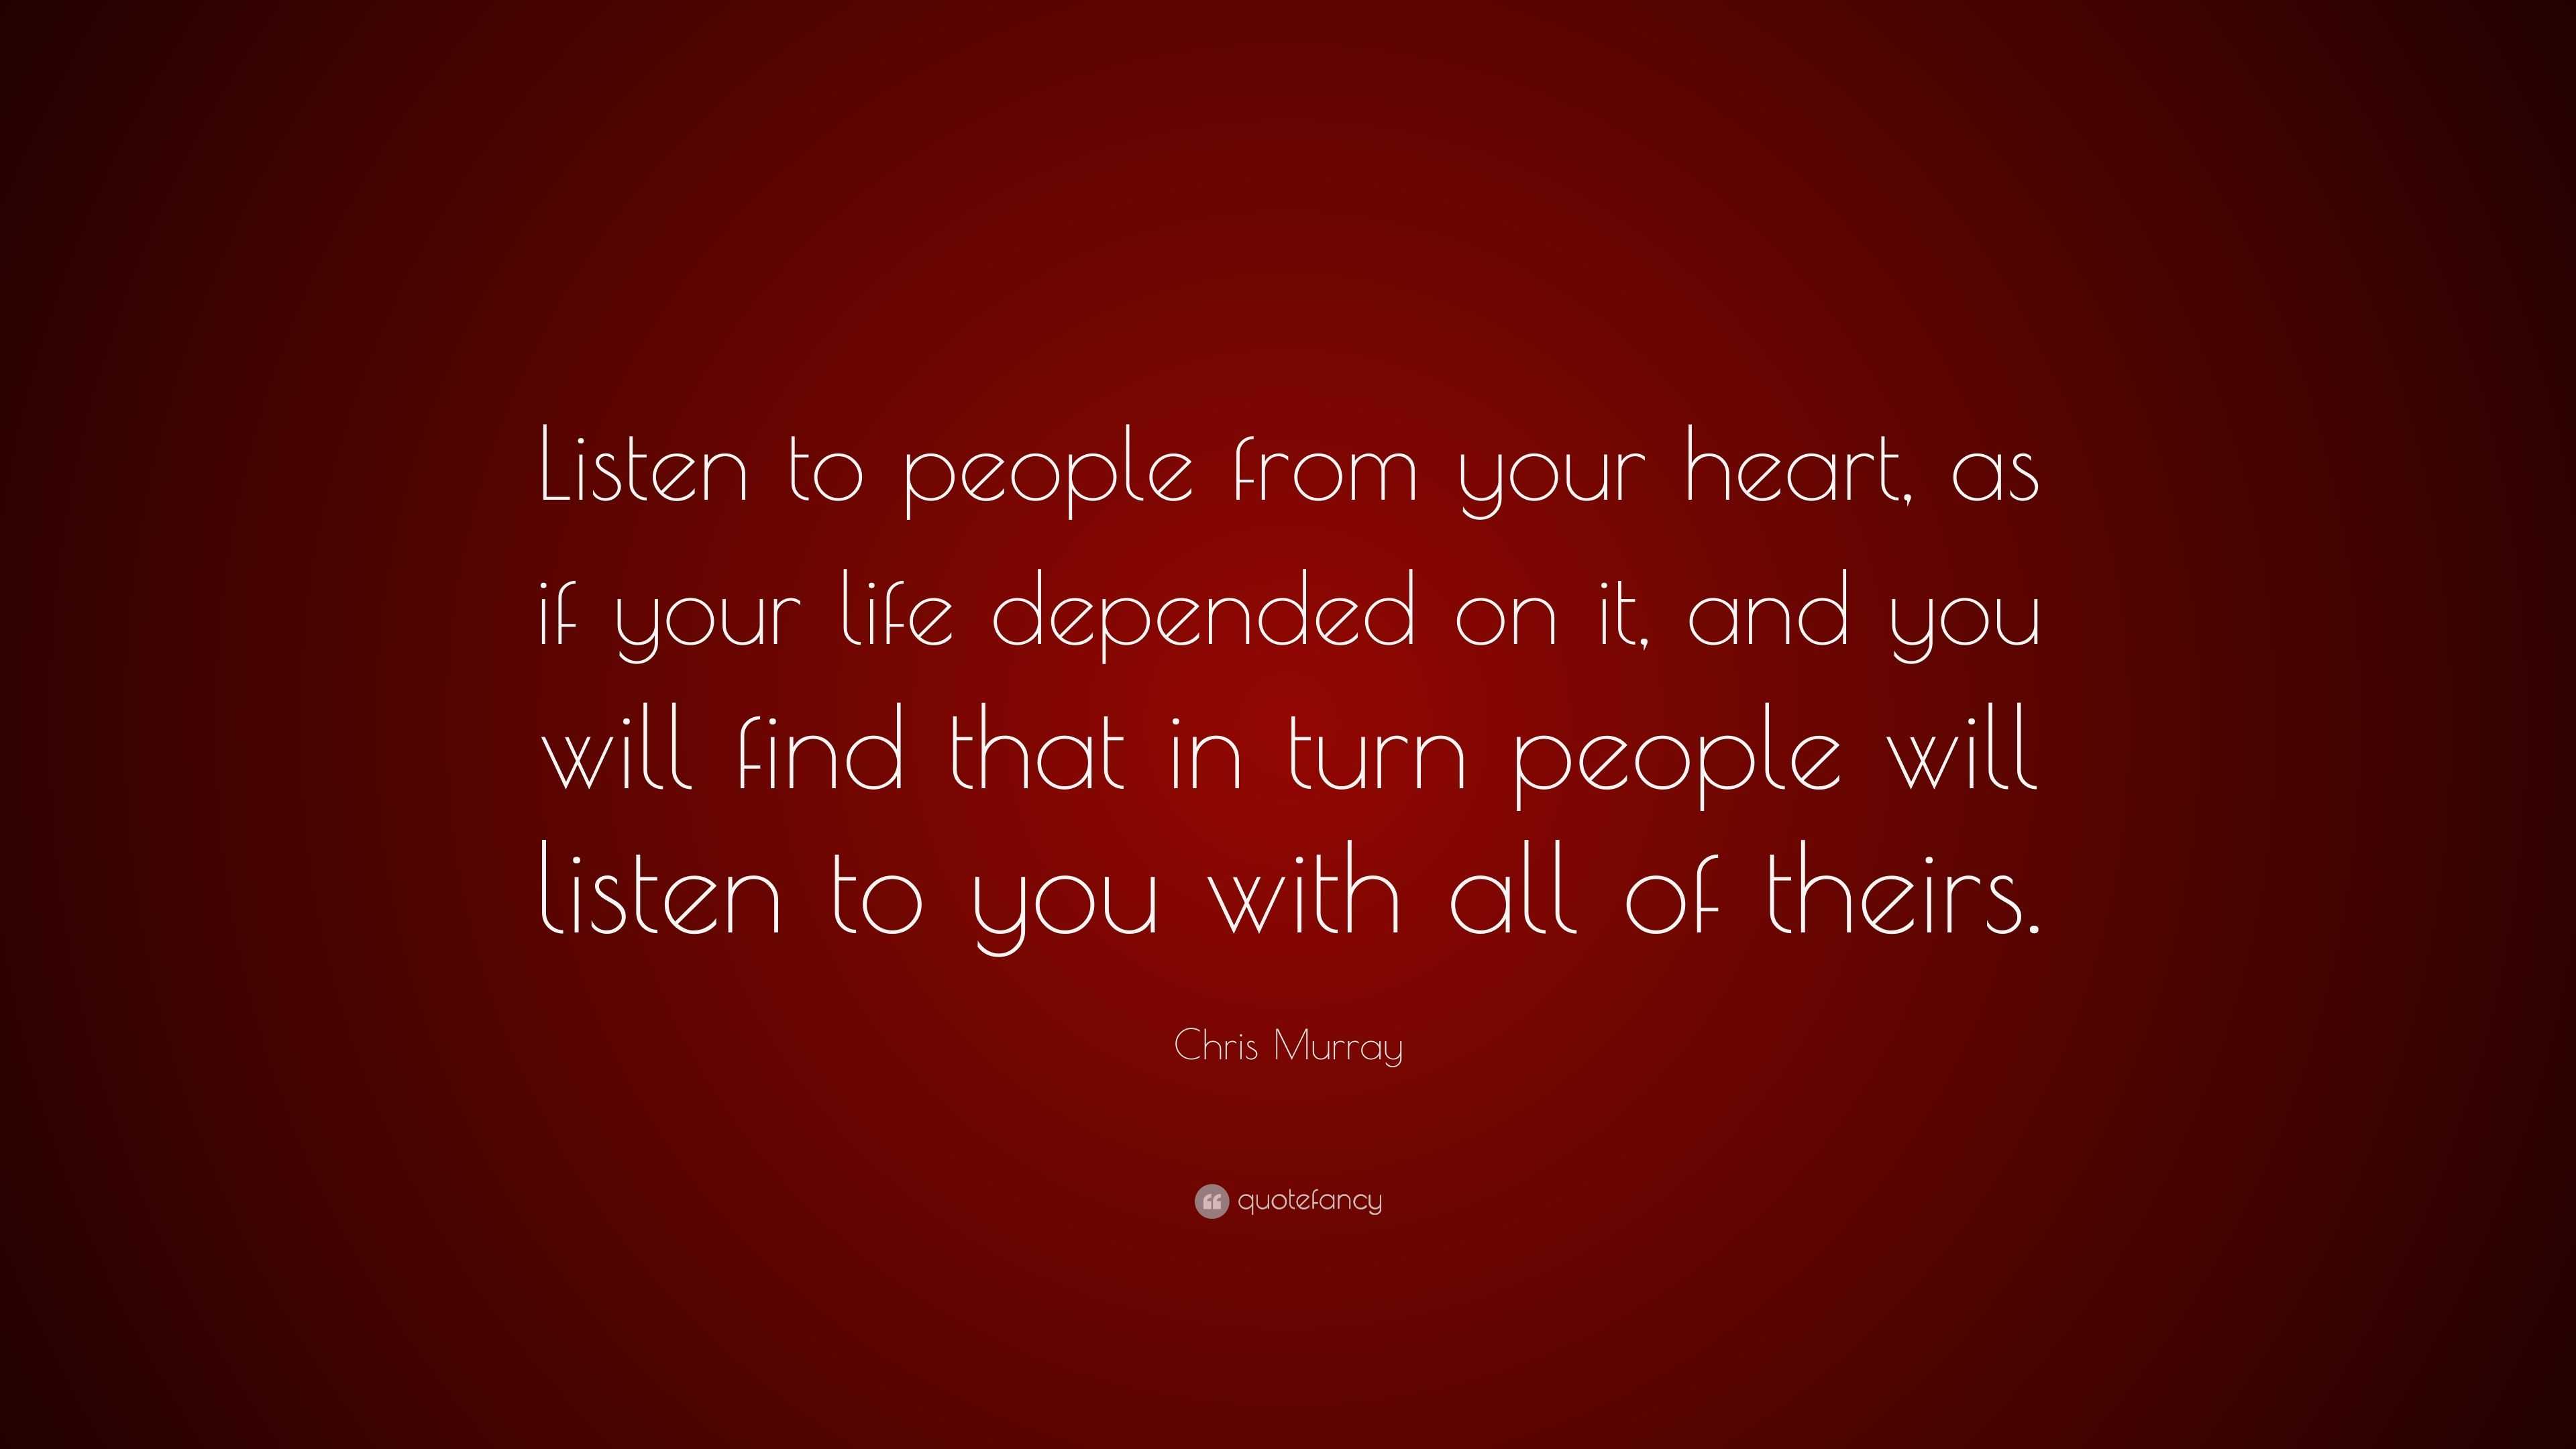 Chris Murray Quote: “Listen to people from your heart, as if your life ...